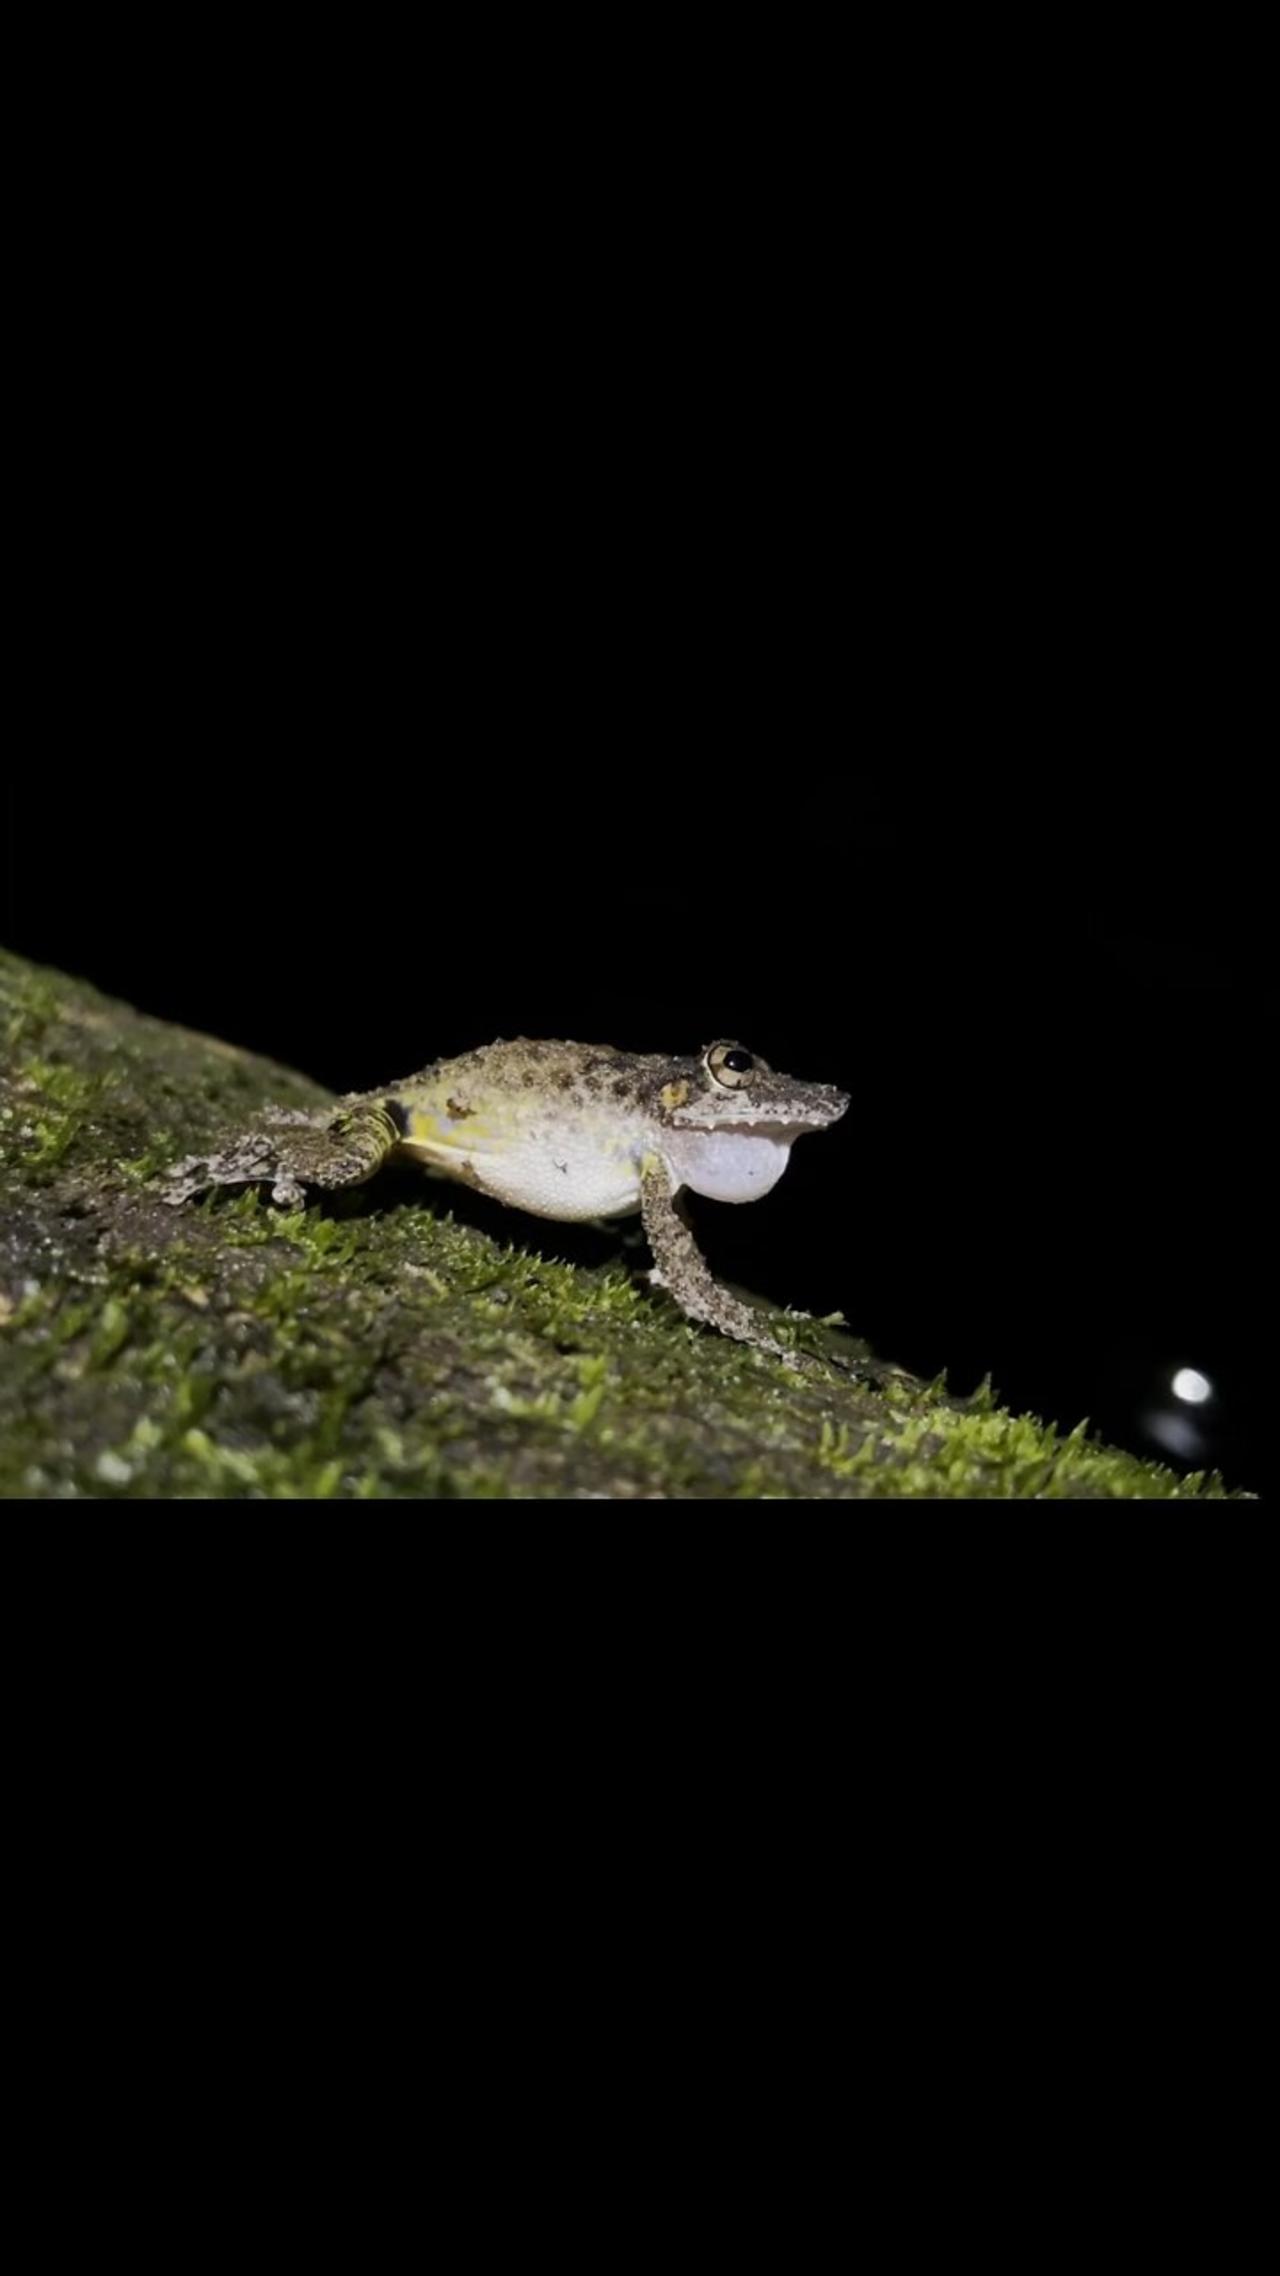 Boulenger's Long-snouted Tree Frog, Costa Rica.